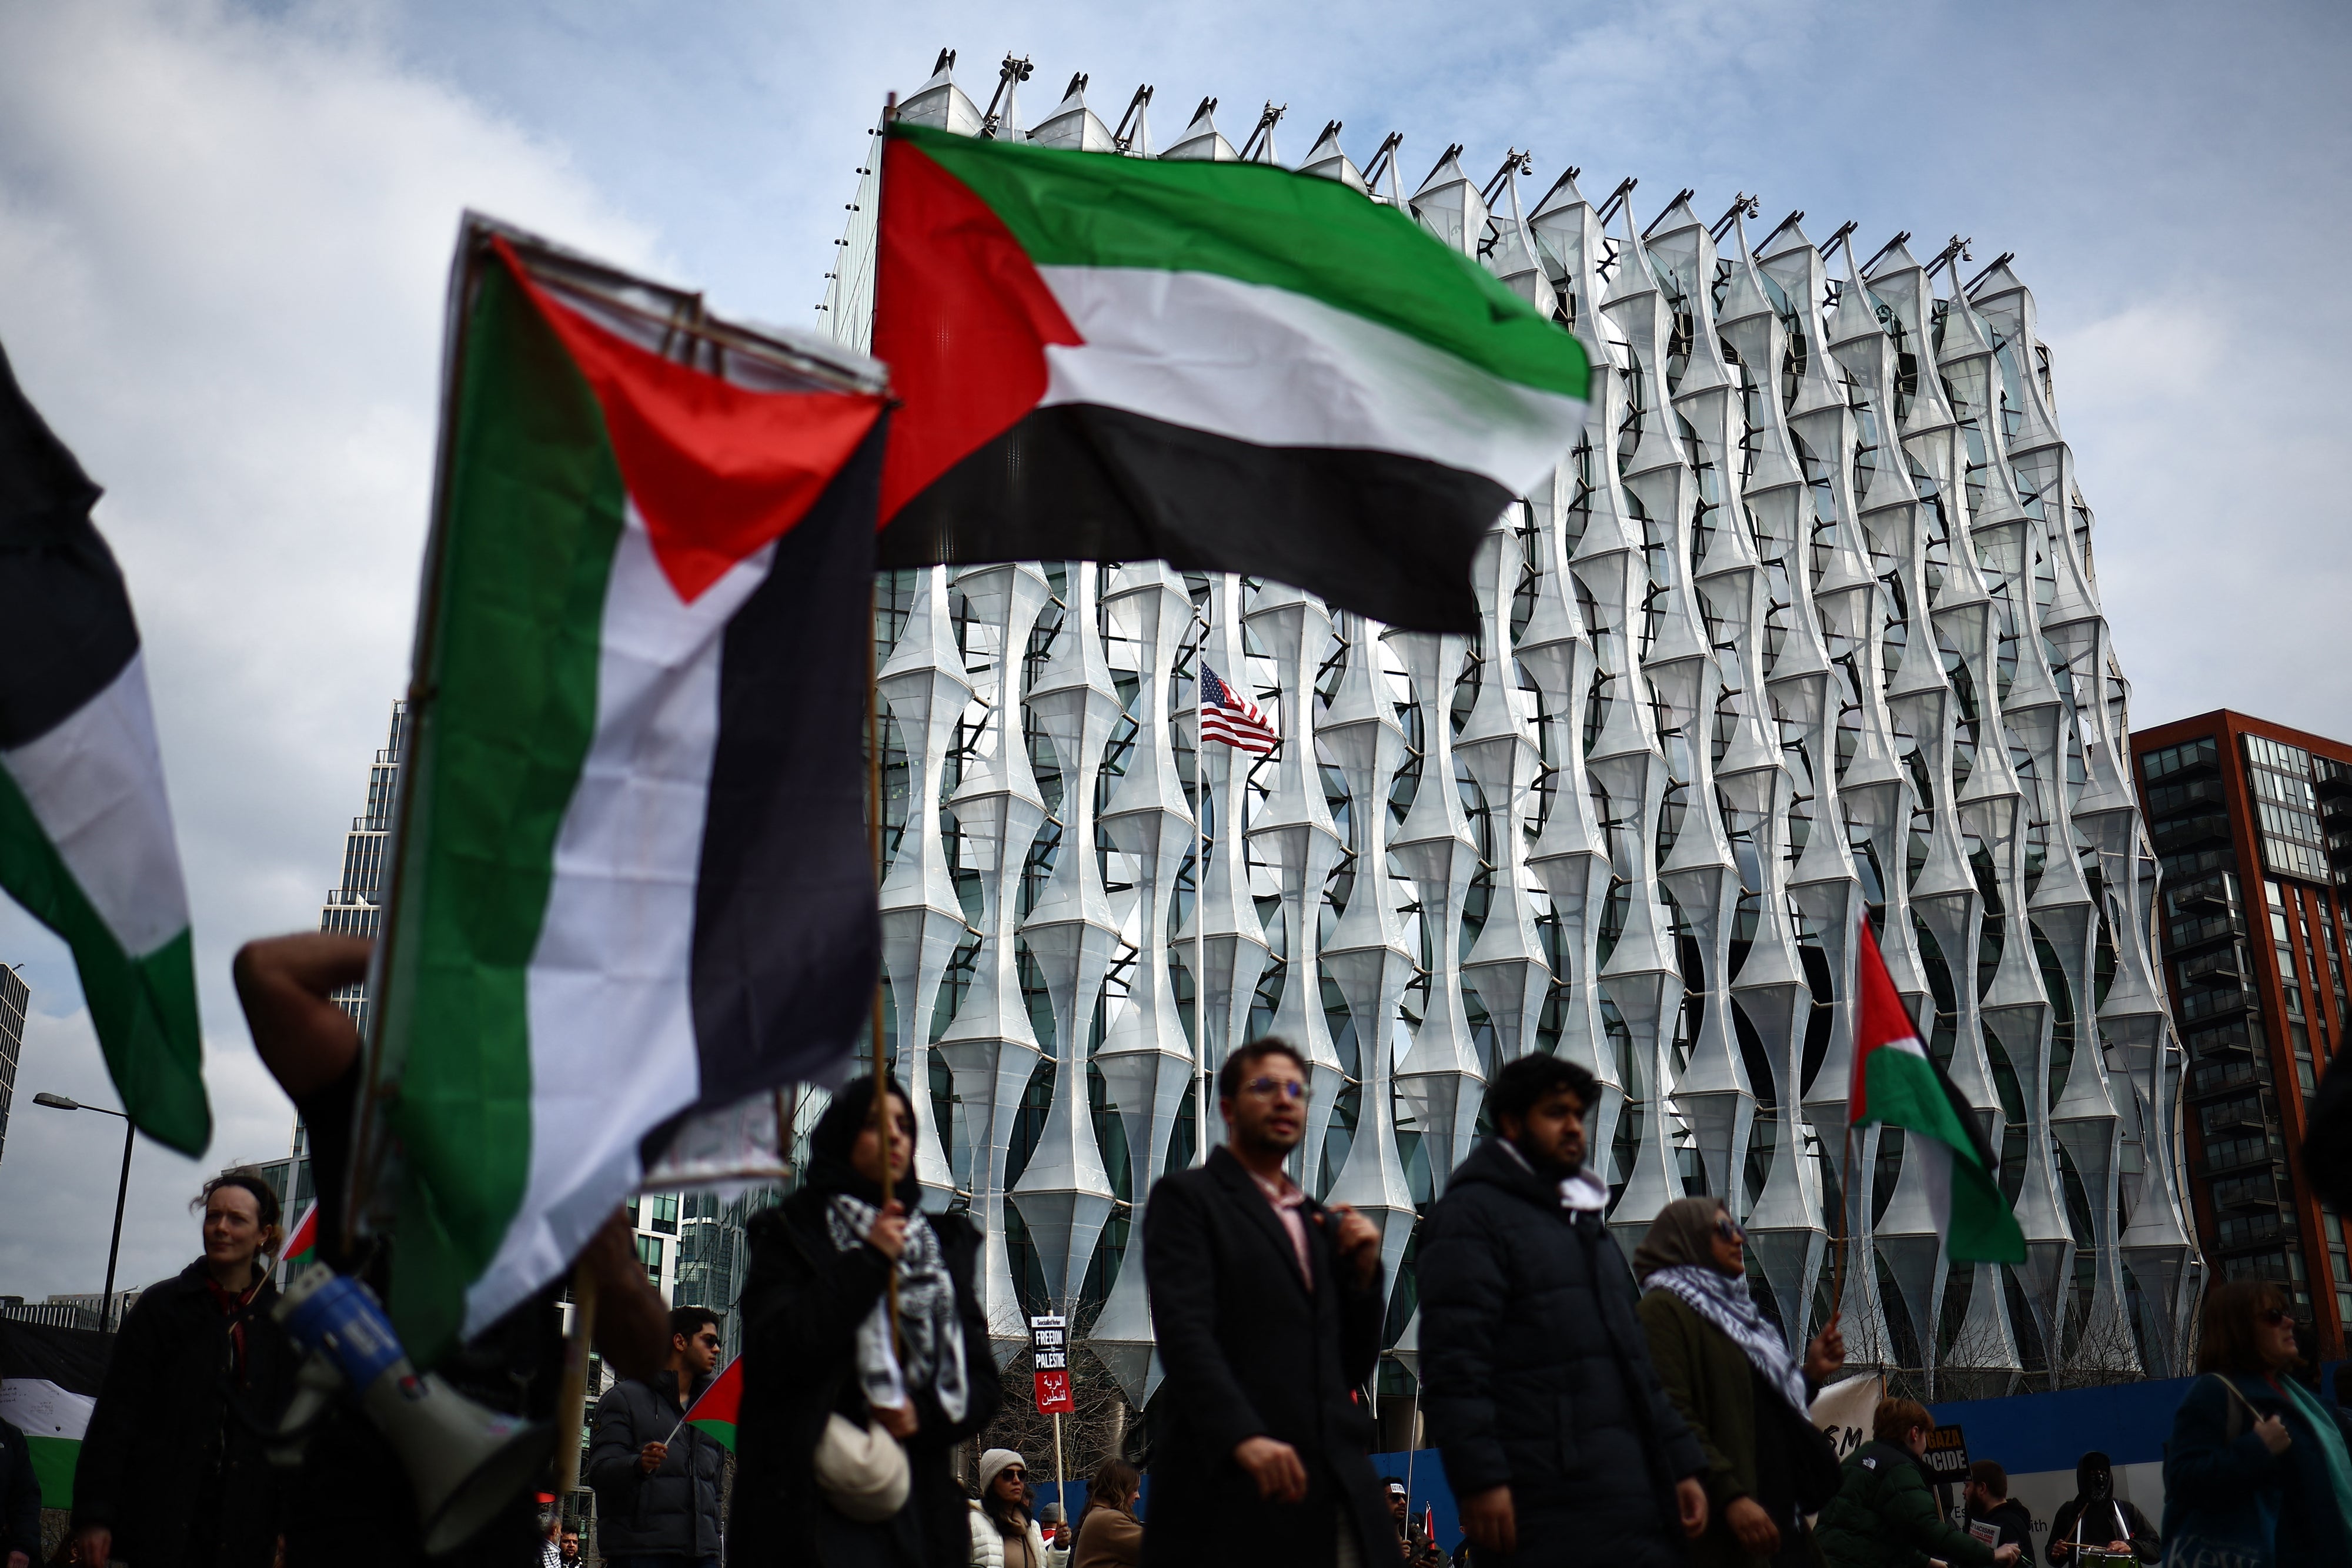 Pro-Palestinian activists and supporters wave flags and carry placards on a march past the US Embassy